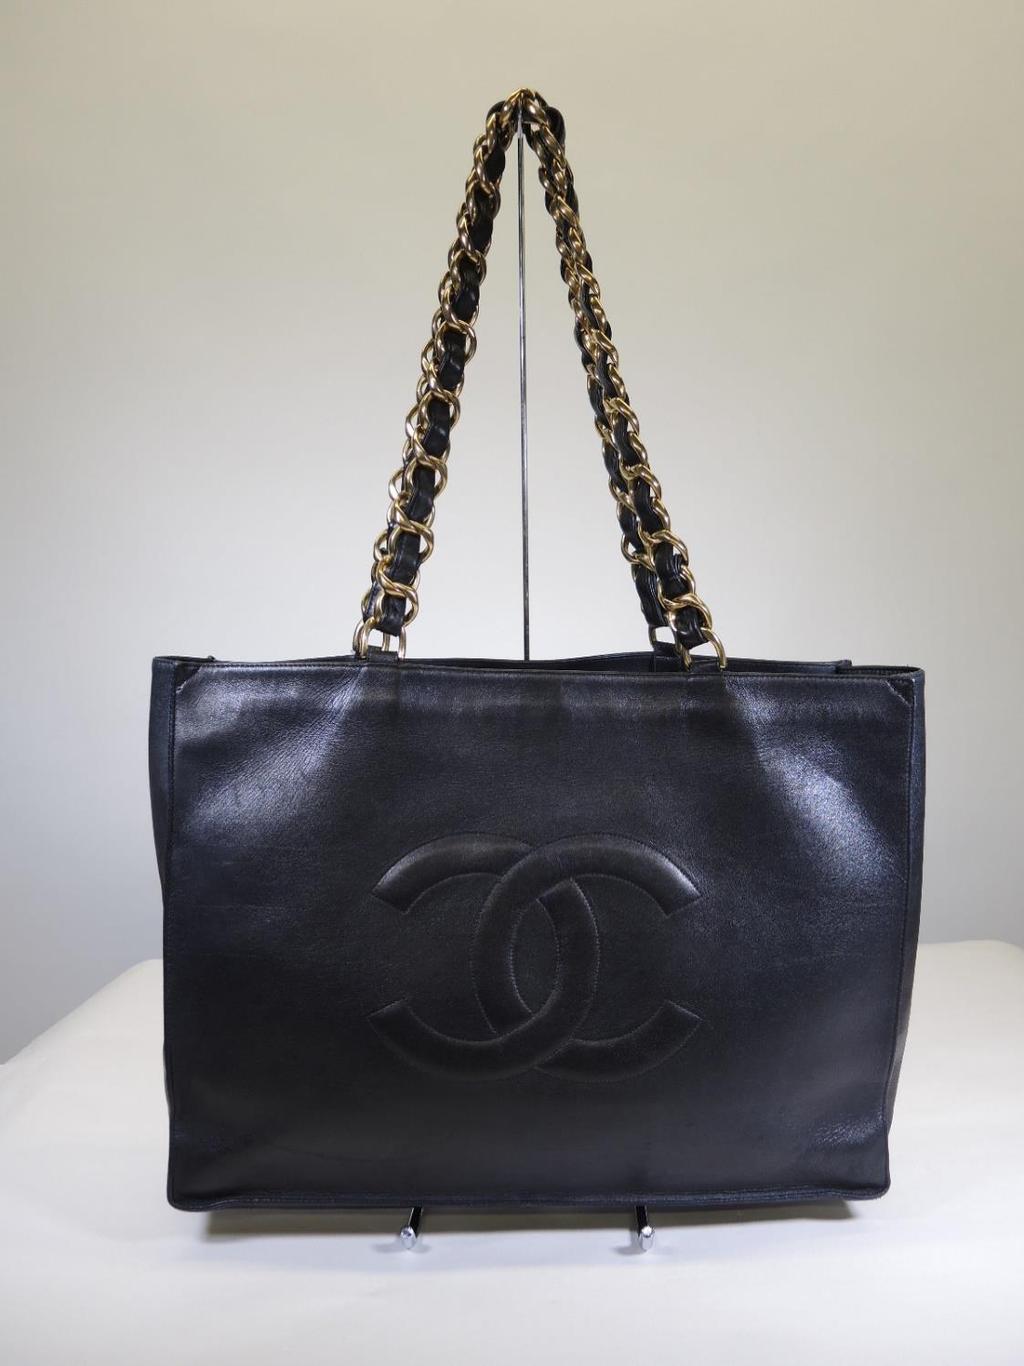 CHANEL XL Shopping Tote Sold in one day for $2000. 08/05/17 A collector s dream come true, this extra large tote from 1995 is an iconic Chanel piece.